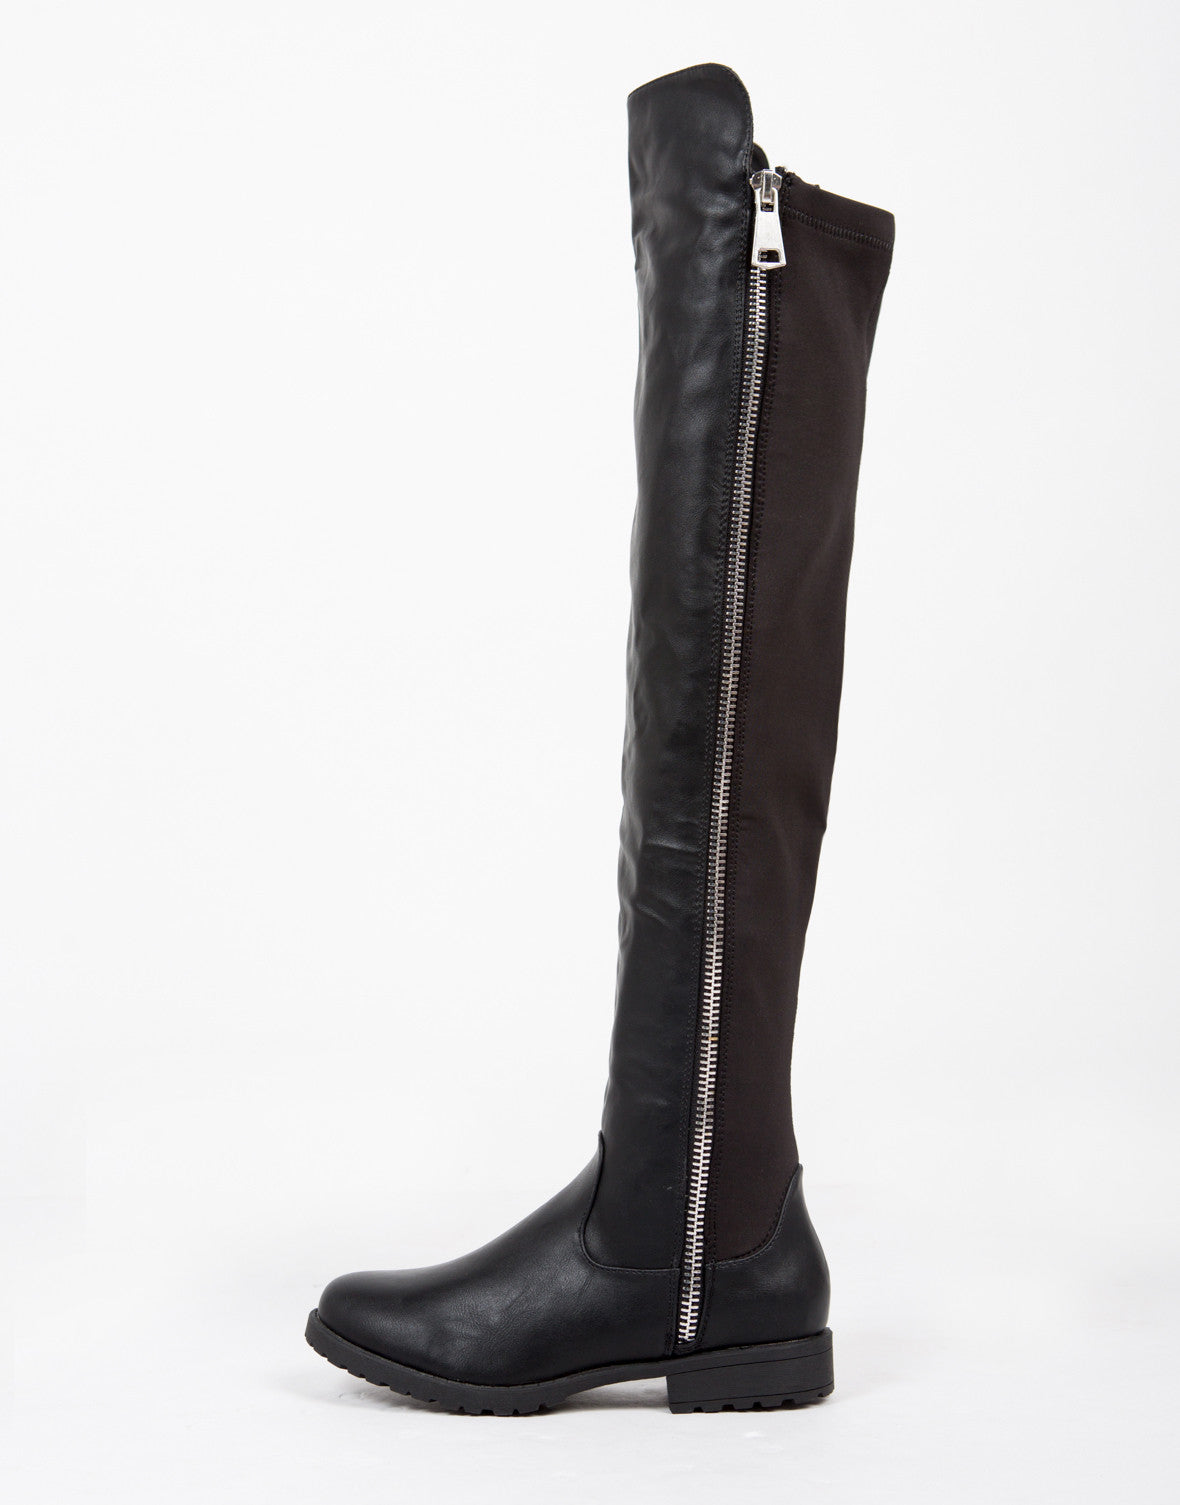 Contrast Zipper Over-the-Knee Boots - Black Boots - Leather Knee Boots ...